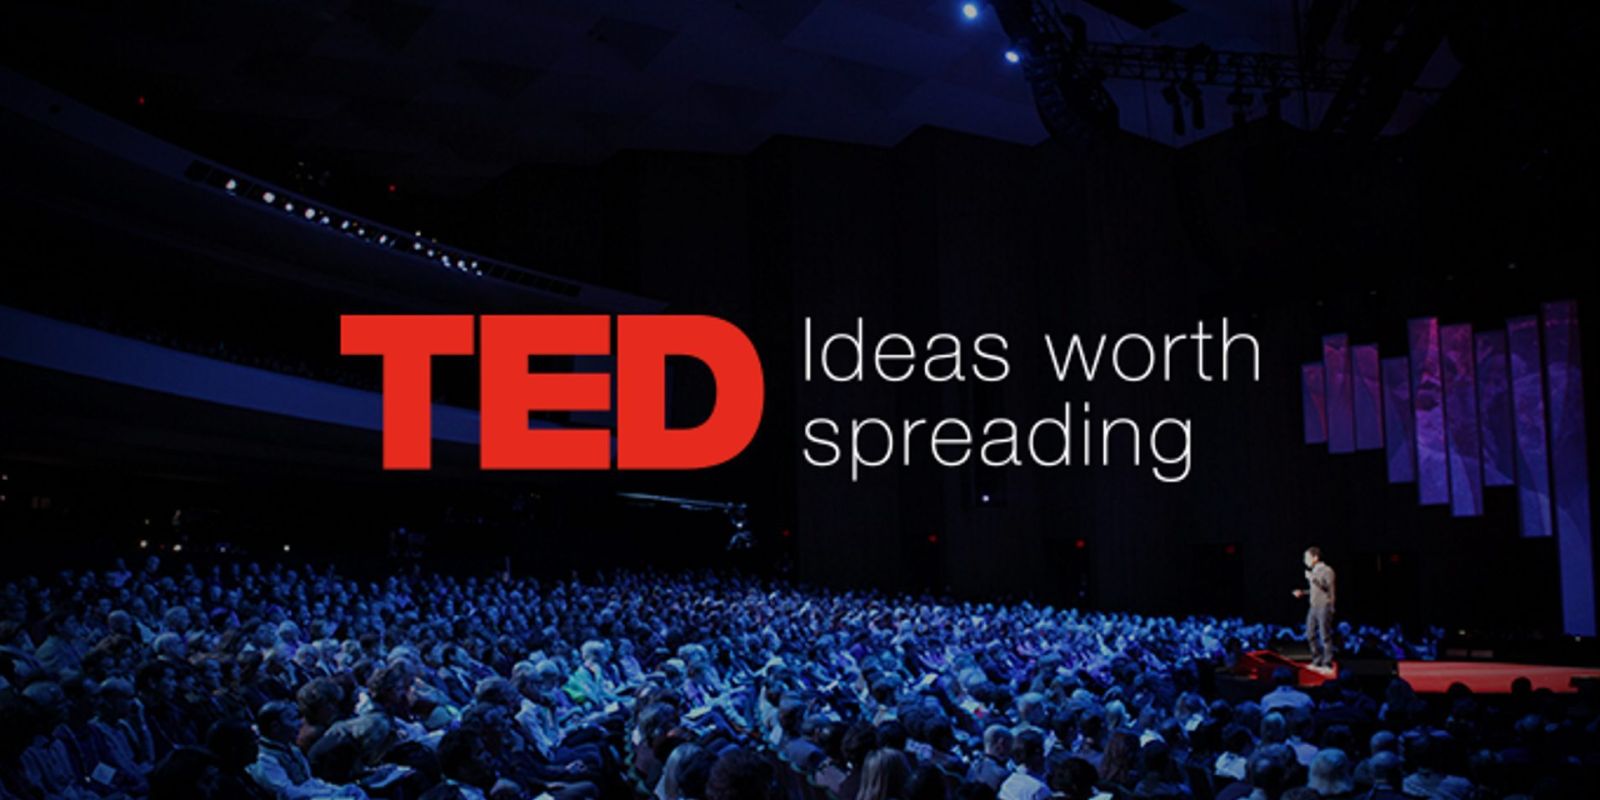 5 Ted Talks That Will Inspire You To Live Sustainably admin ajax.php?action=kernel&p=image&src=%7B%22file%22%3A%22wp content%2Fuploads%2F2021%2F02%2Fpurcorganics TED